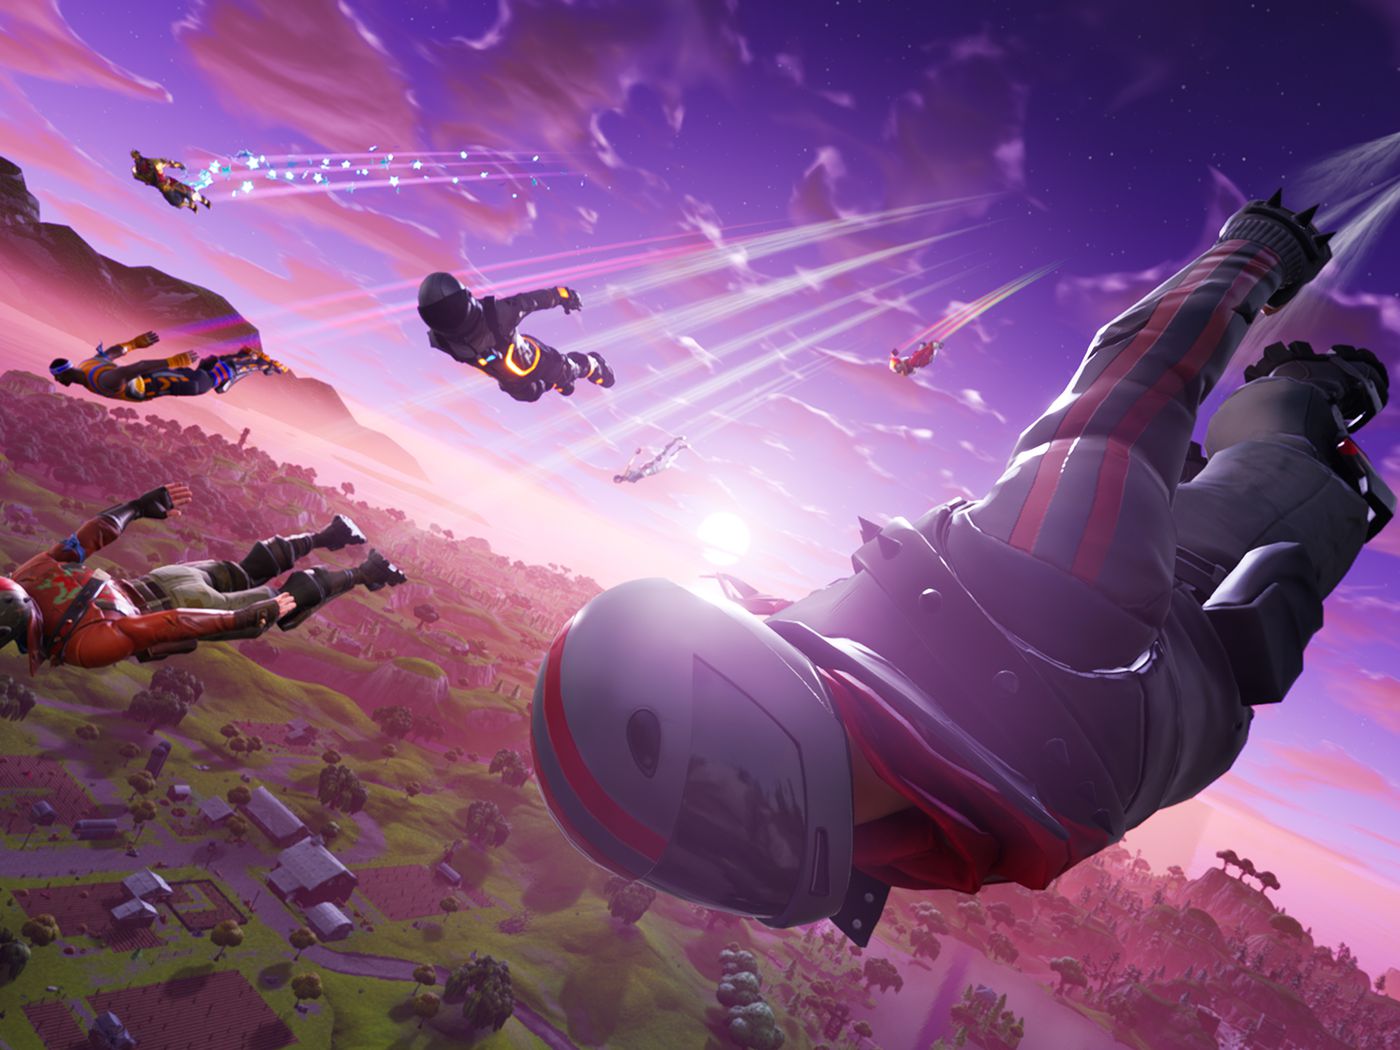 Epic Online Services is free, gives developers access to Fortnite-style  cross-play - Polygon